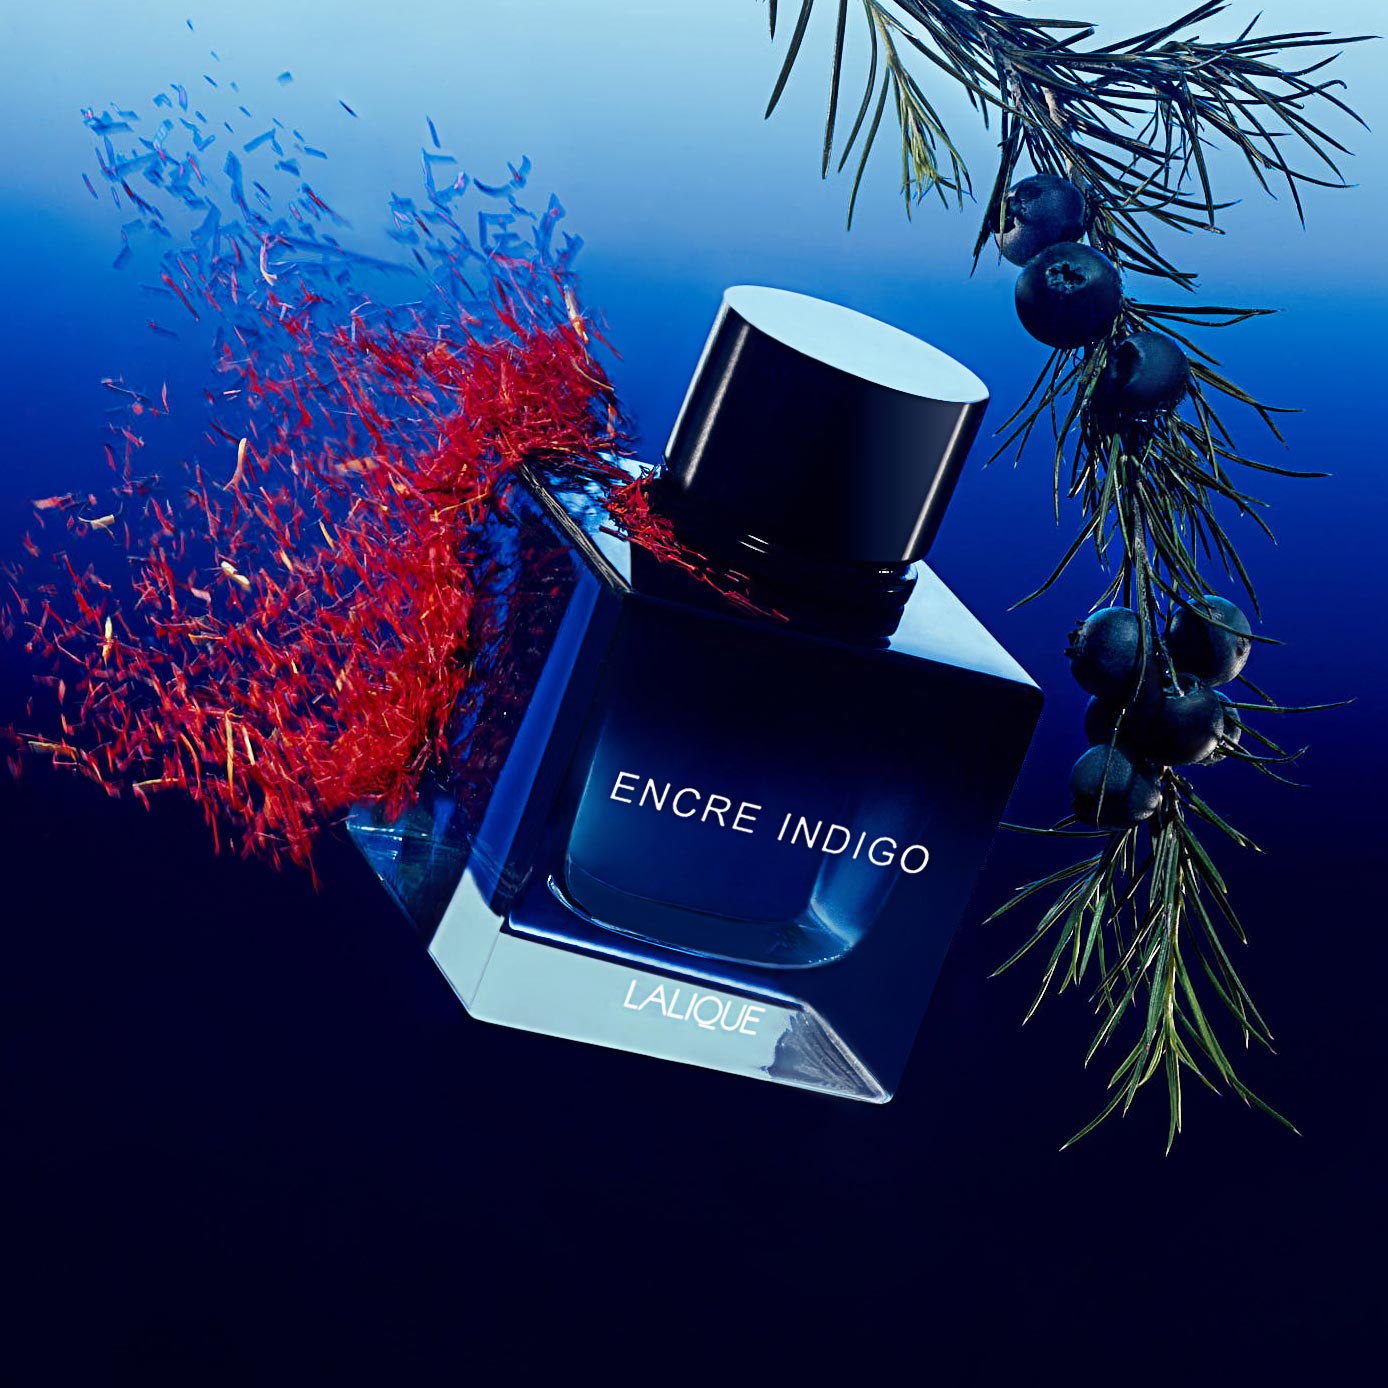 Have you seen the new Bleu Encre in real life?